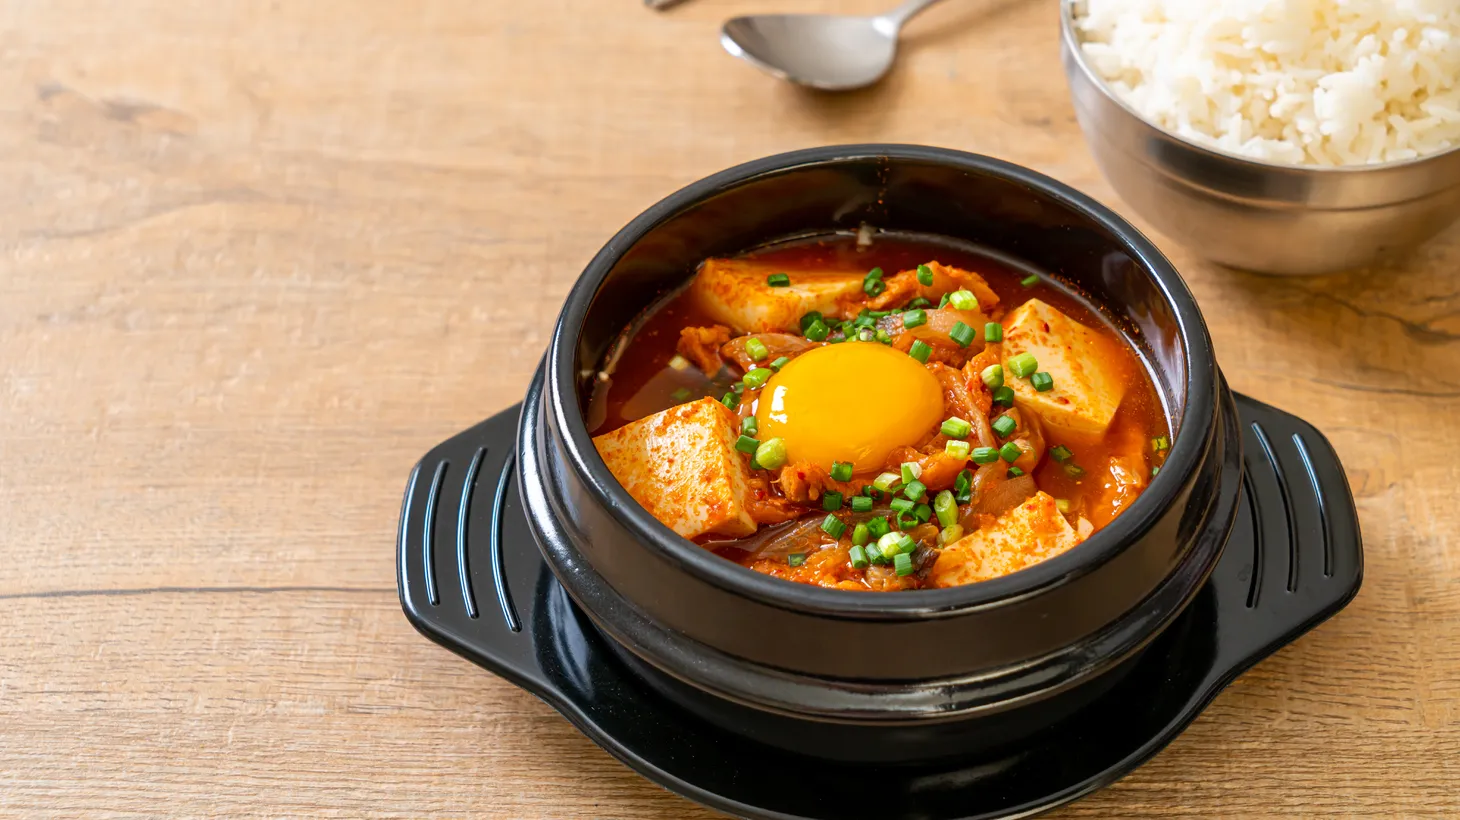 Hot tofu soup is perfect as winter approaches. You can make your own with recipes from “Sohn-mat: Recipes and Flavors of Korean Home Cooking.”